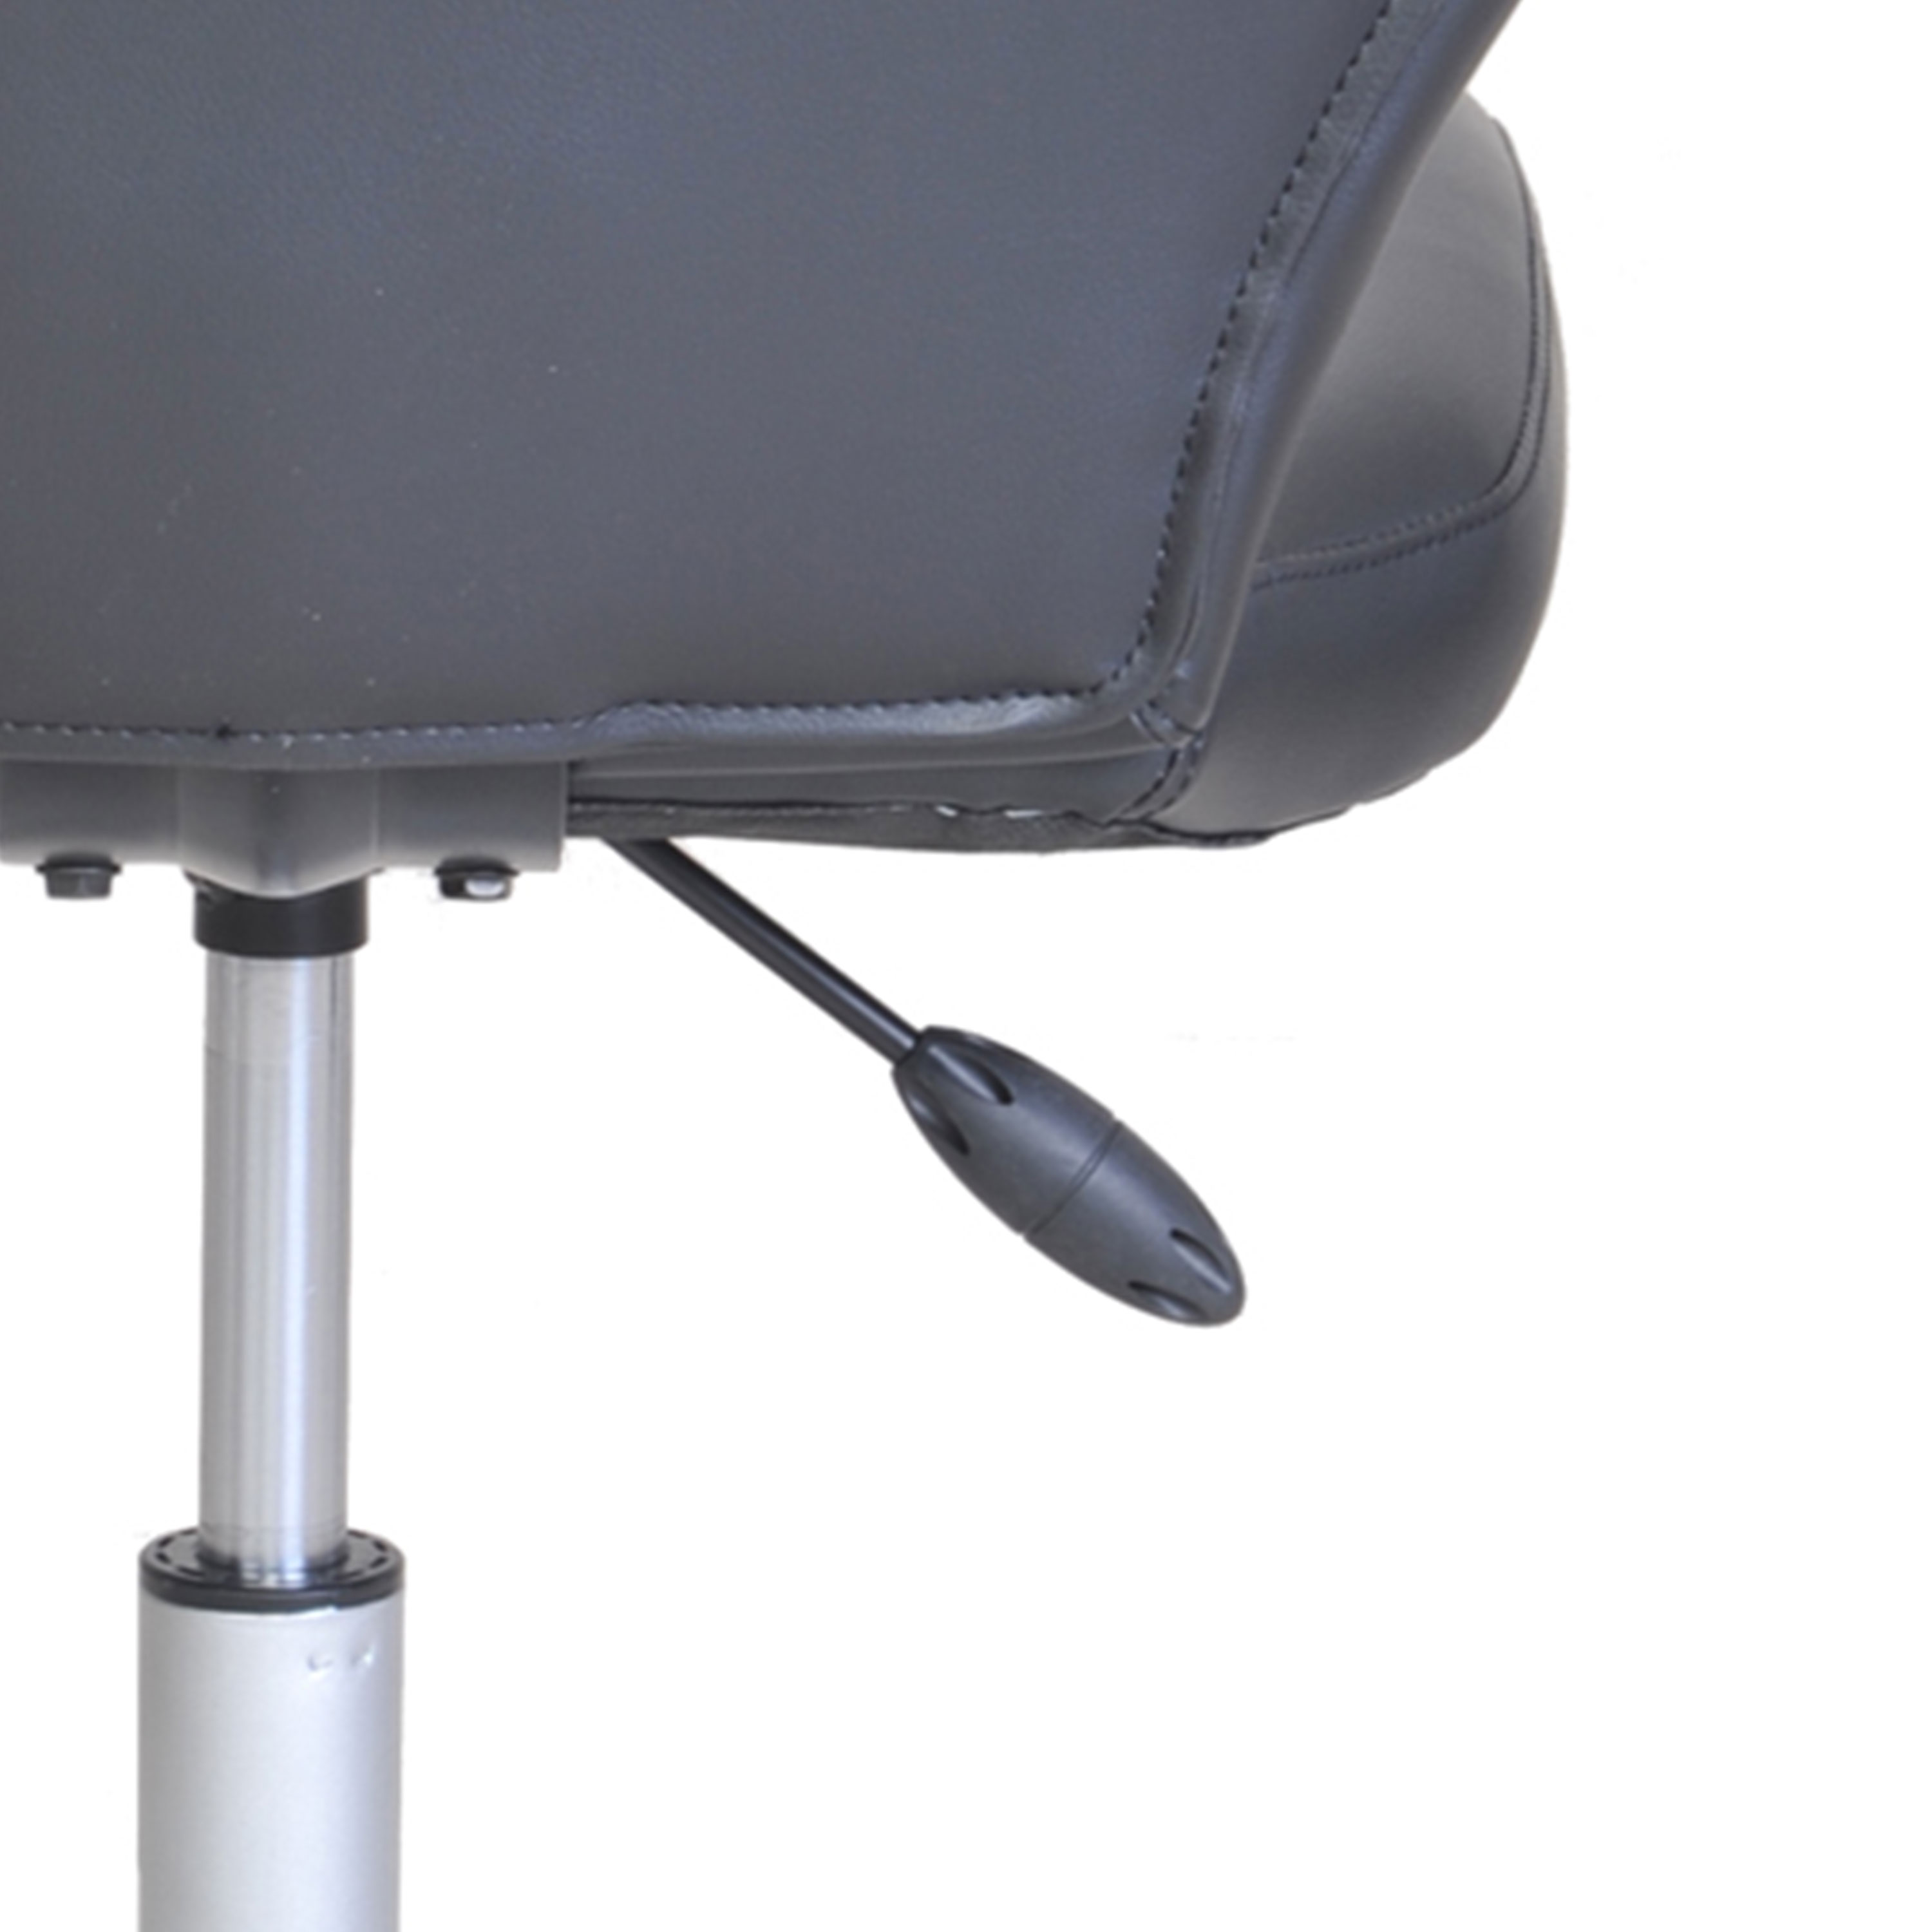 Mainstays Mid-Back Office Chair with Matching Color Casters, Gray Faux Leather - image 5 of 6